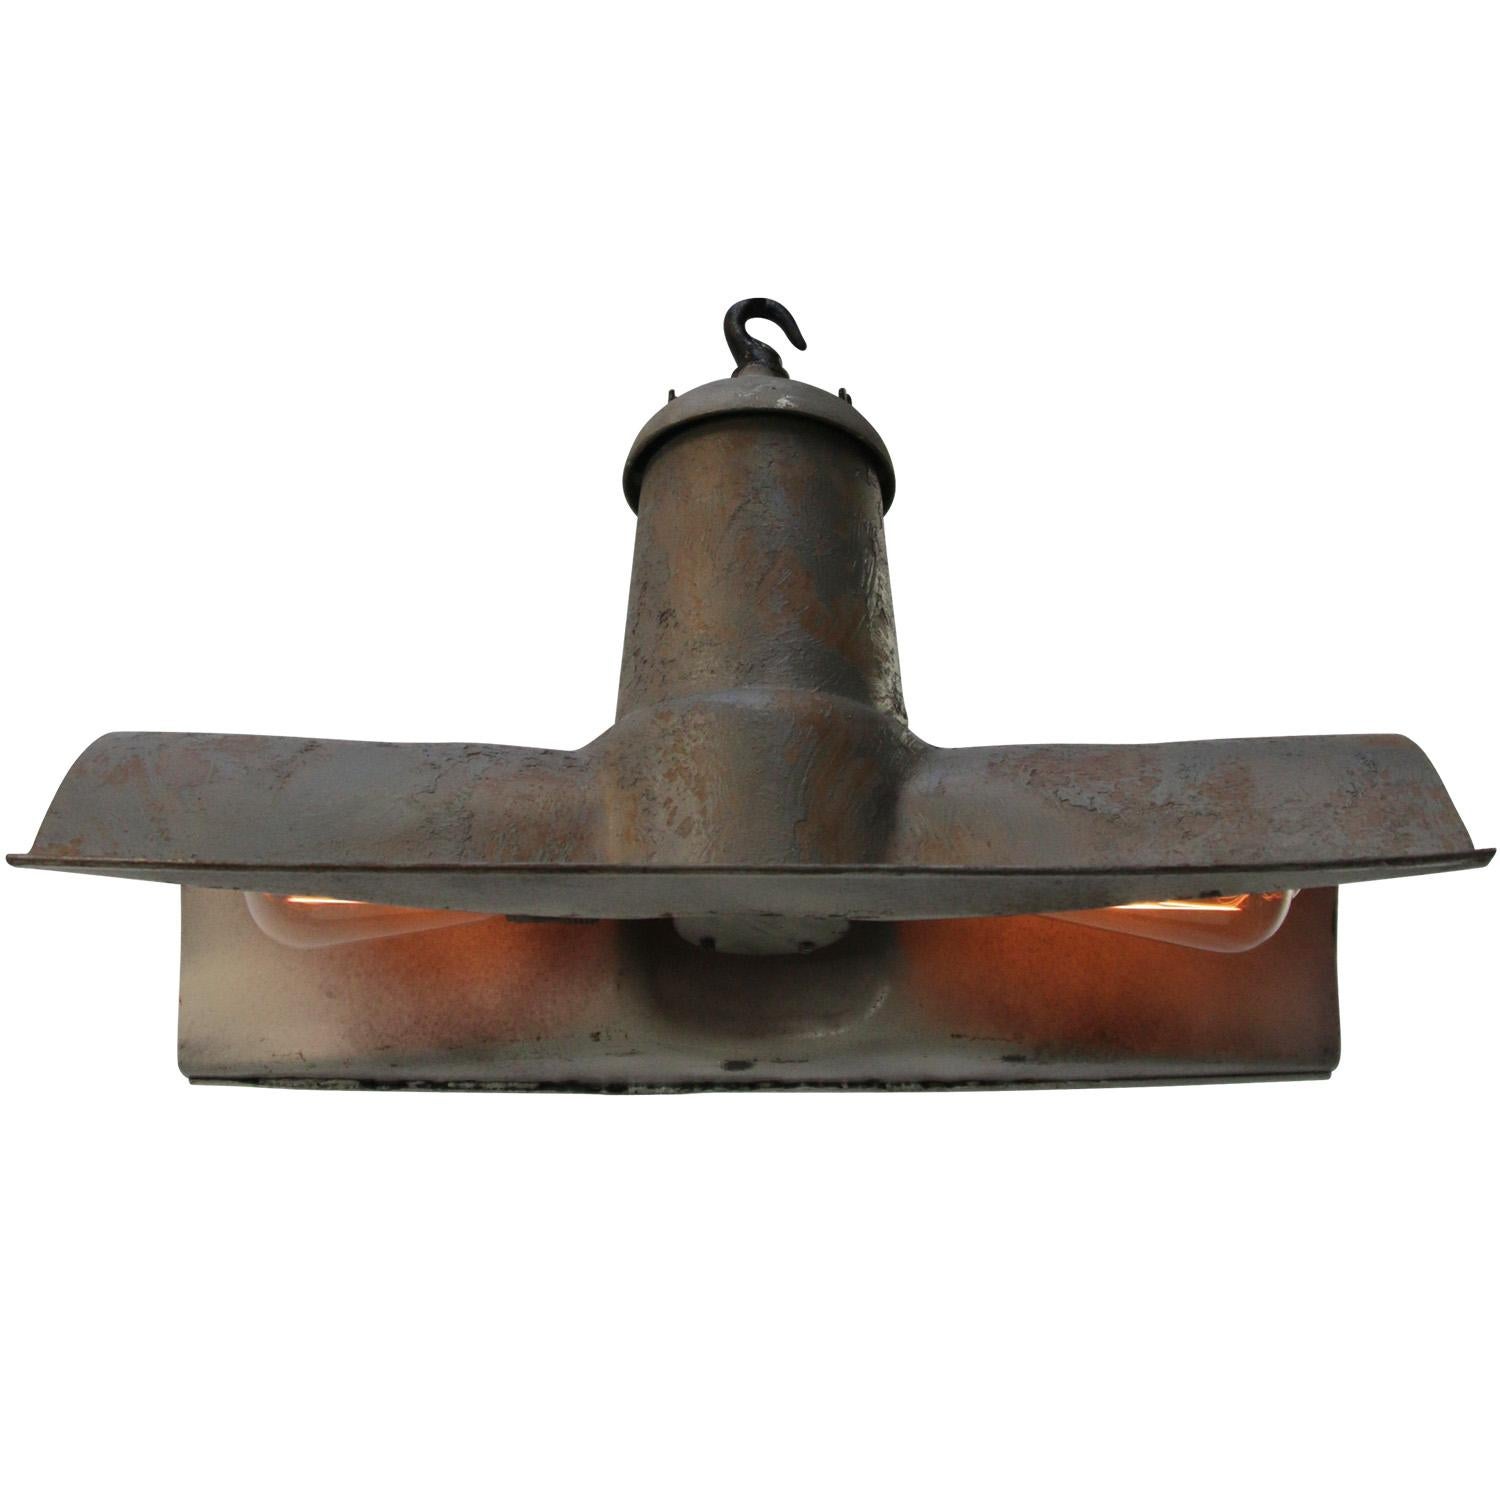 British metal industrial pendant light by Benjamin, UK In Good Condition For Sale In Amsterdam, NL